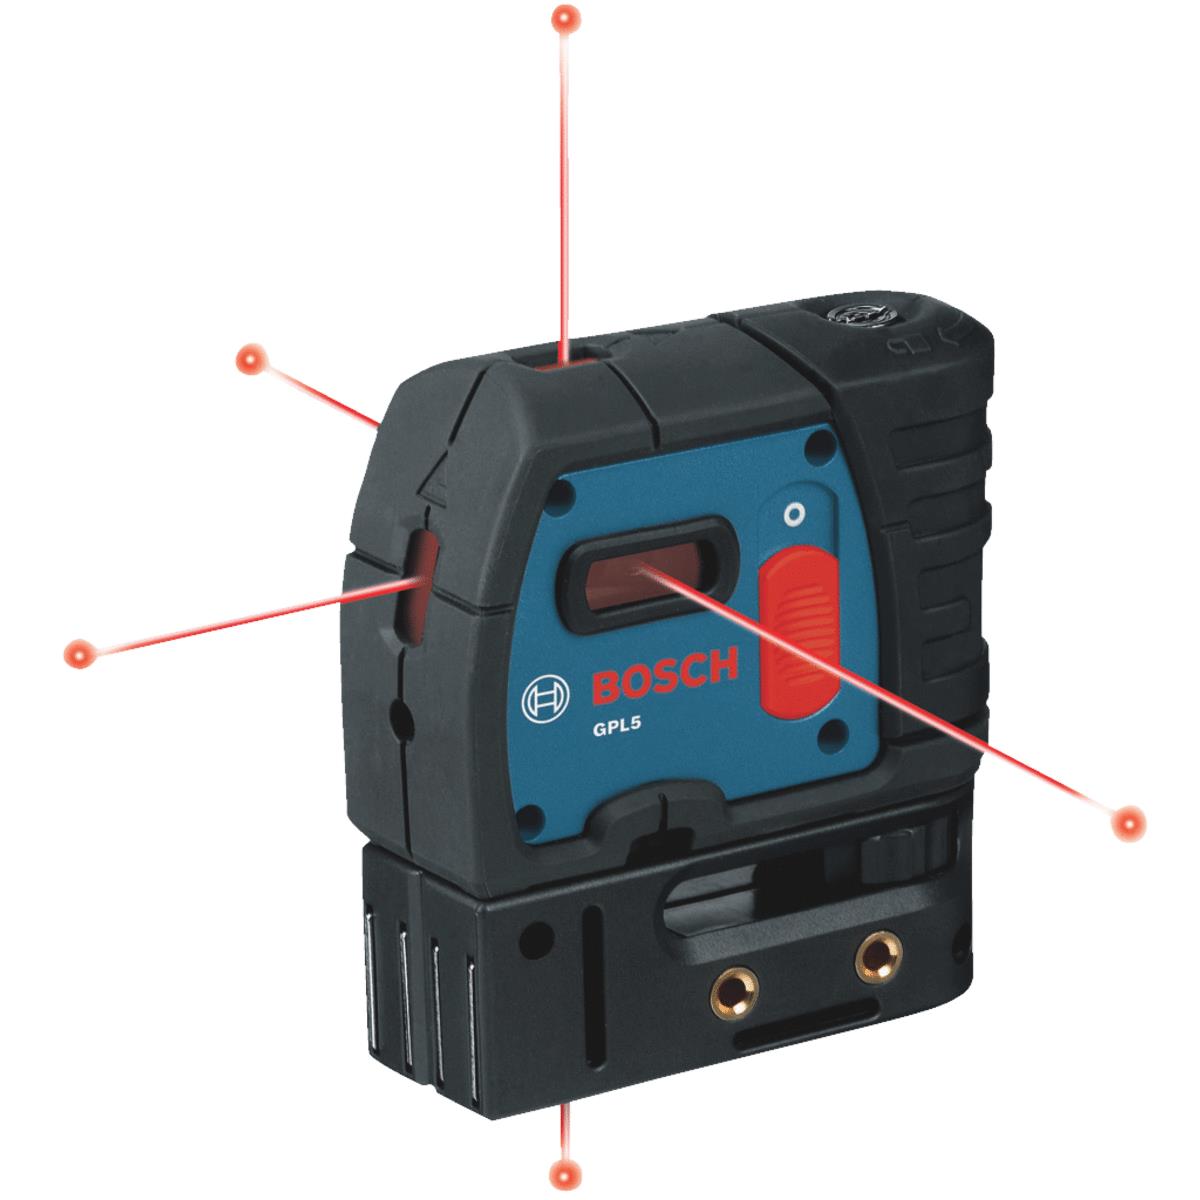 Bosch Bosch GPL5 5-Point Self-Leveling Alignment Laser Level for sale online 